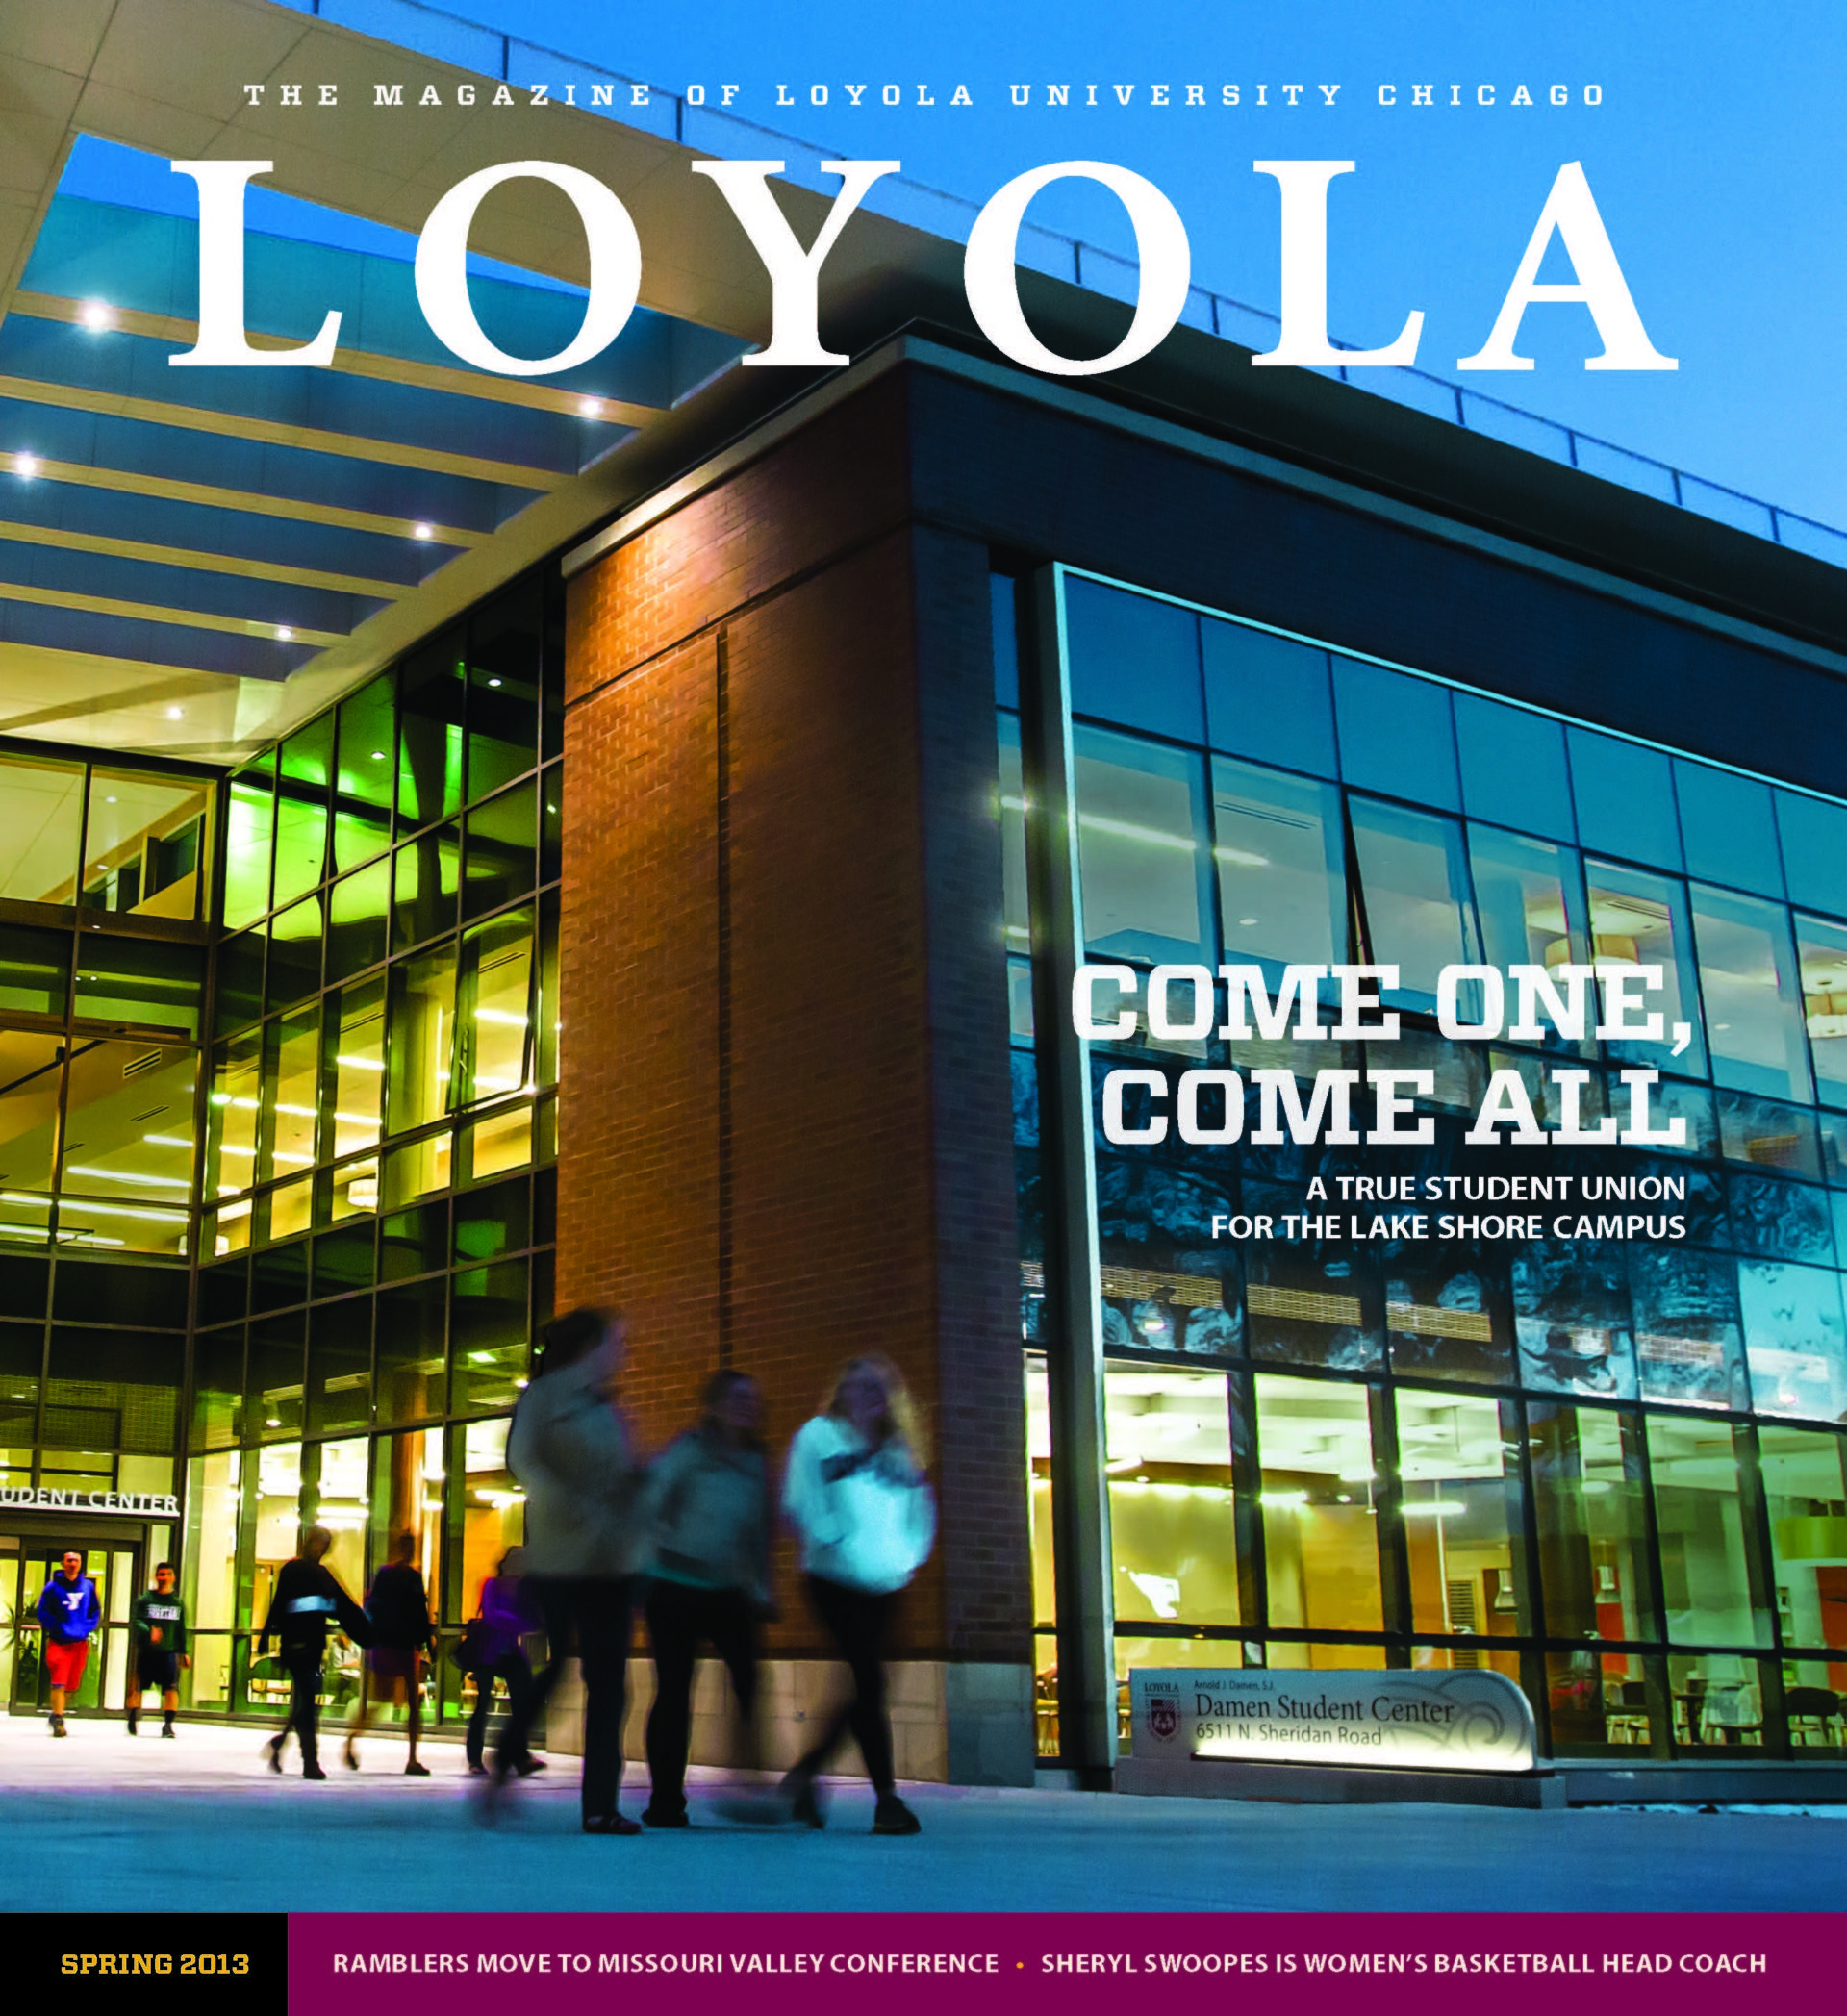 The Spring 2013 Loyola magazine cover with a photo of Damen Student Center and the text 